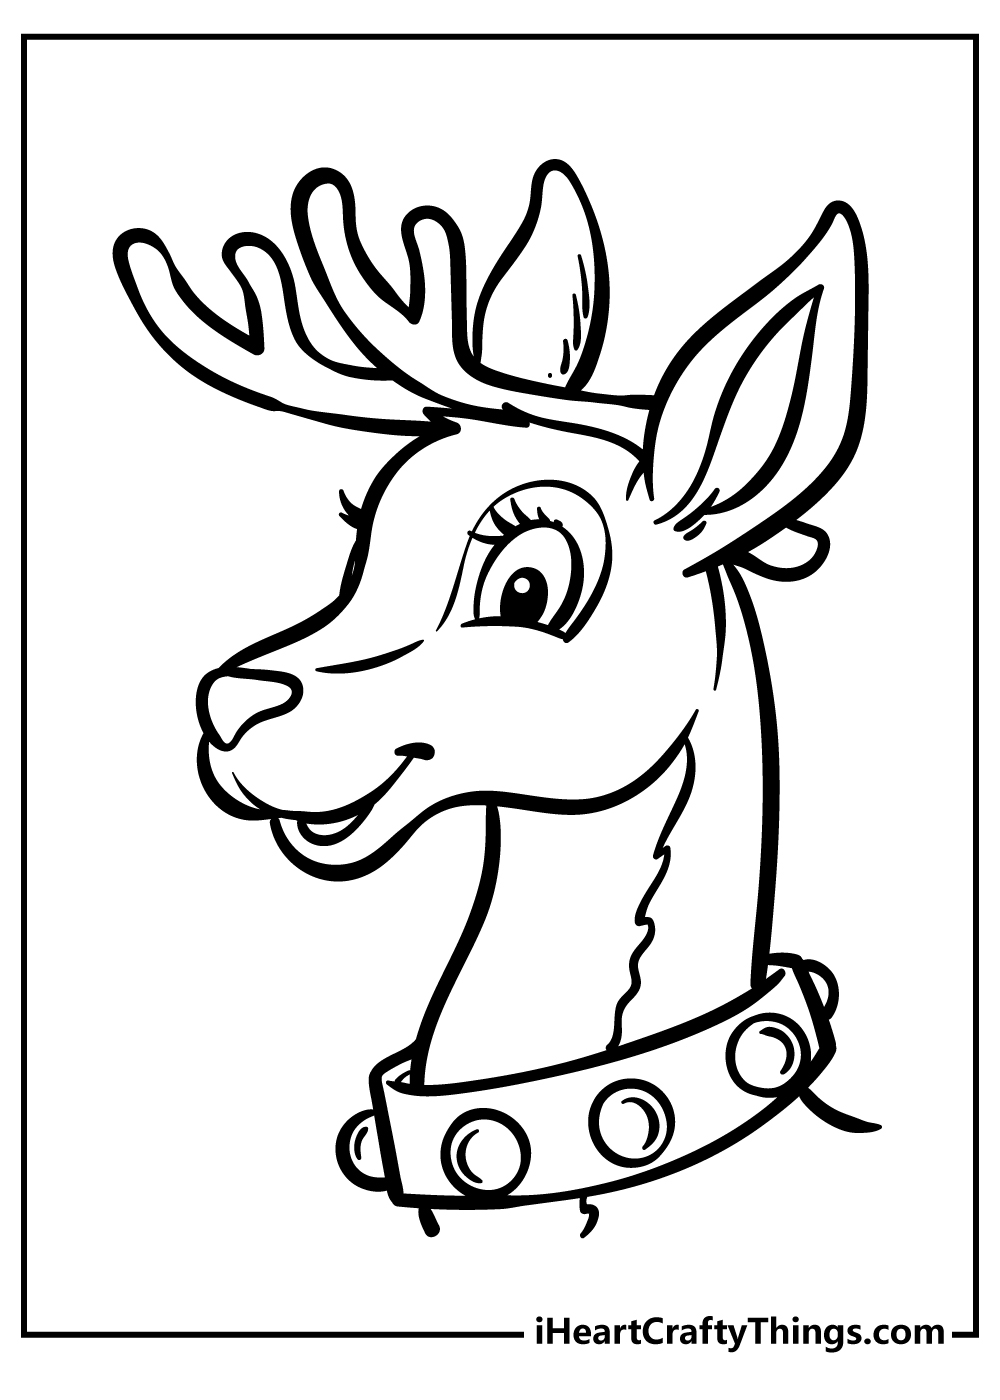 Rudolph Easy Coloring Pages